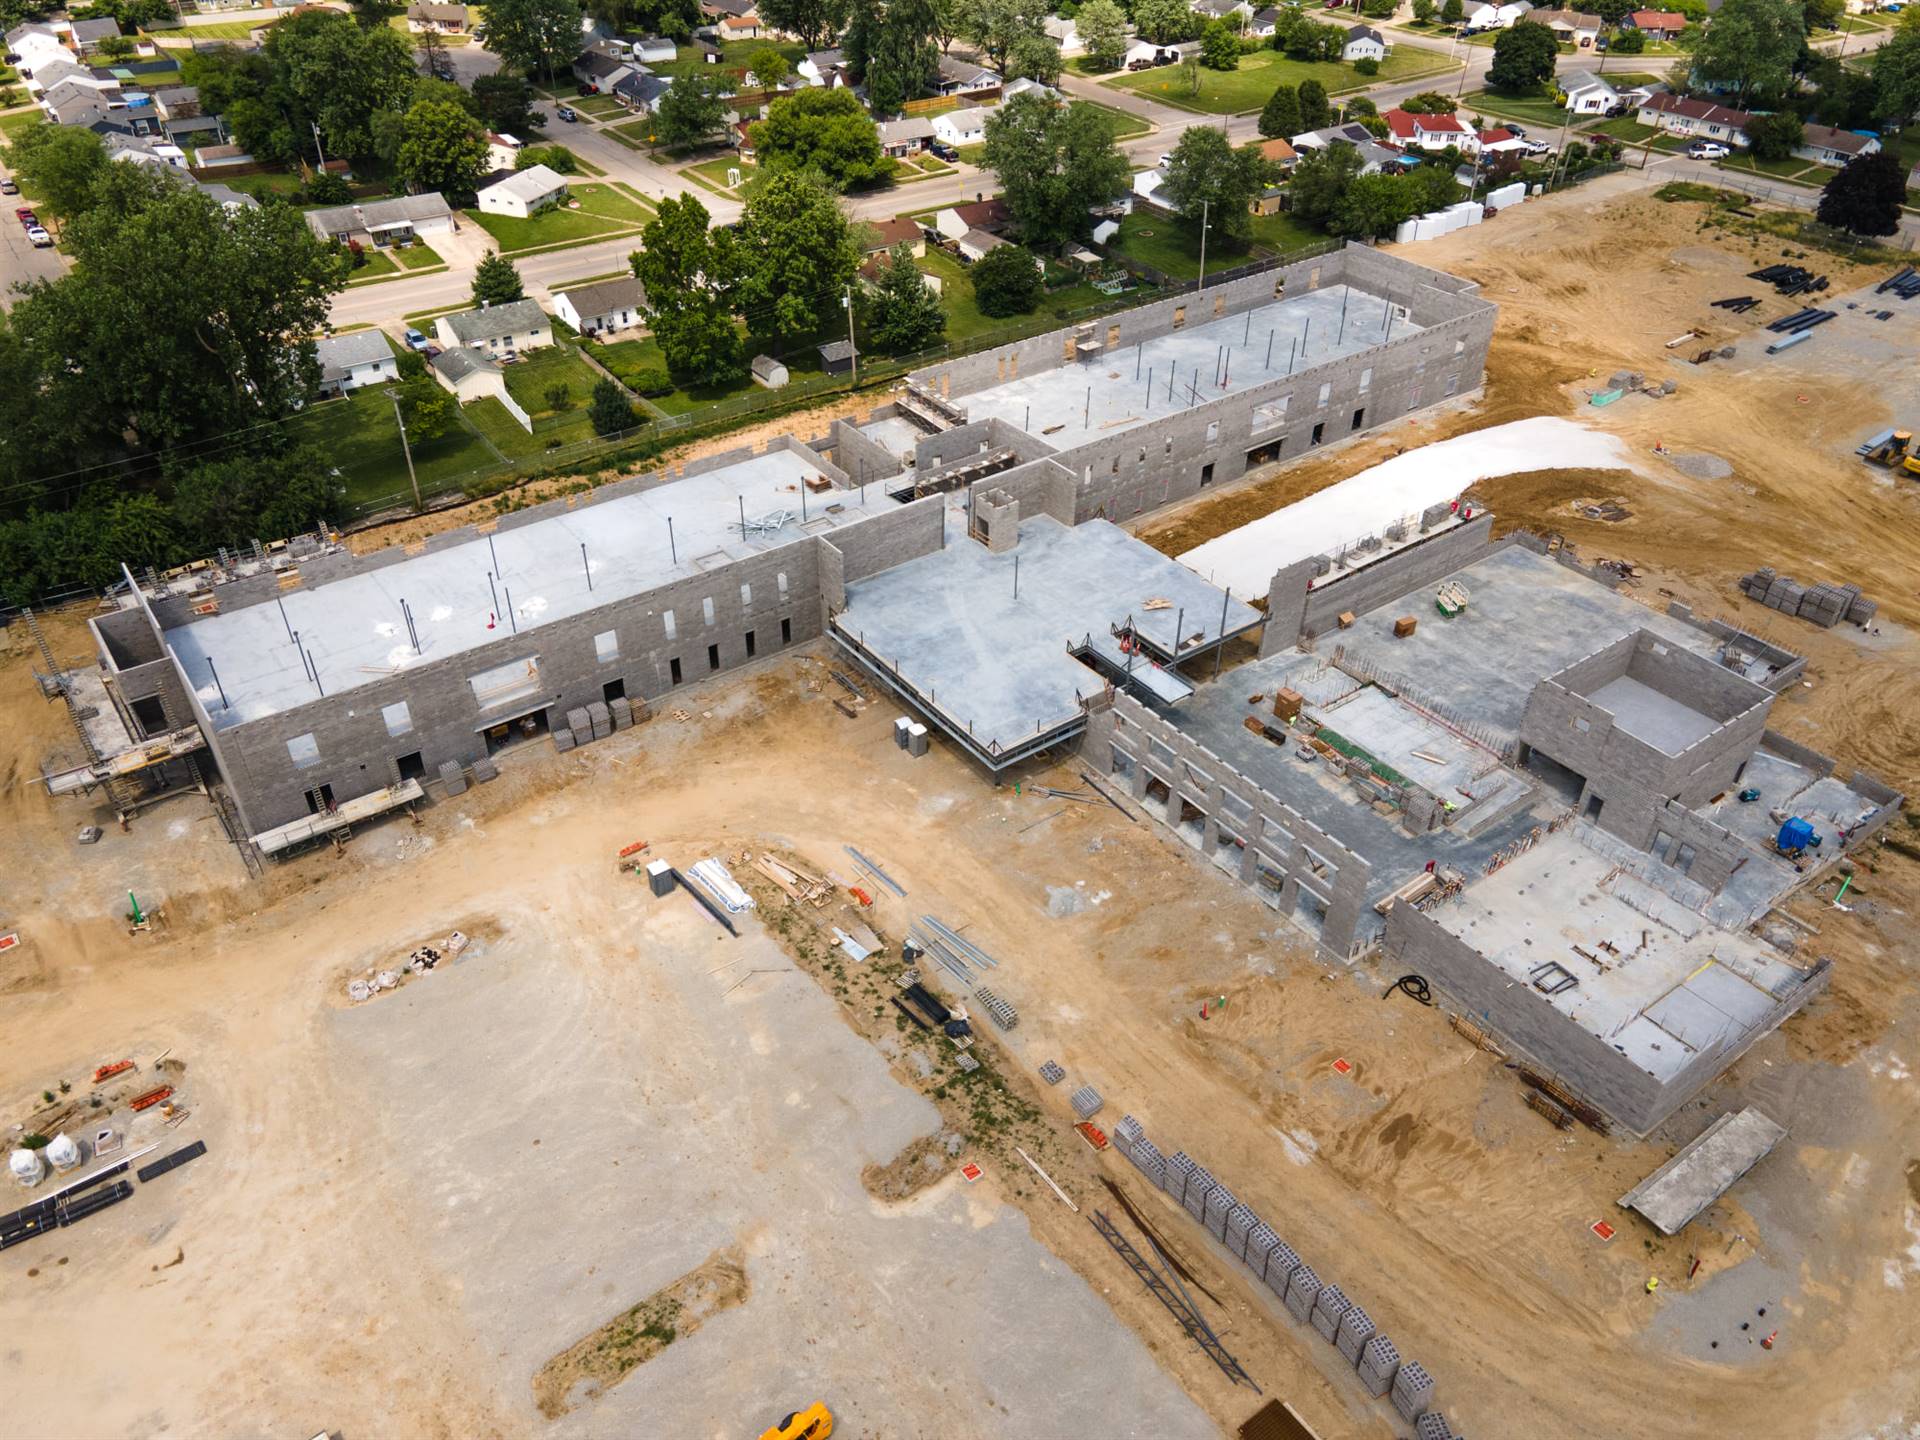 Fairborn Intermediate School View from June 27, 2021 photos from Mark Rickert Busy Bee Aerial Produc